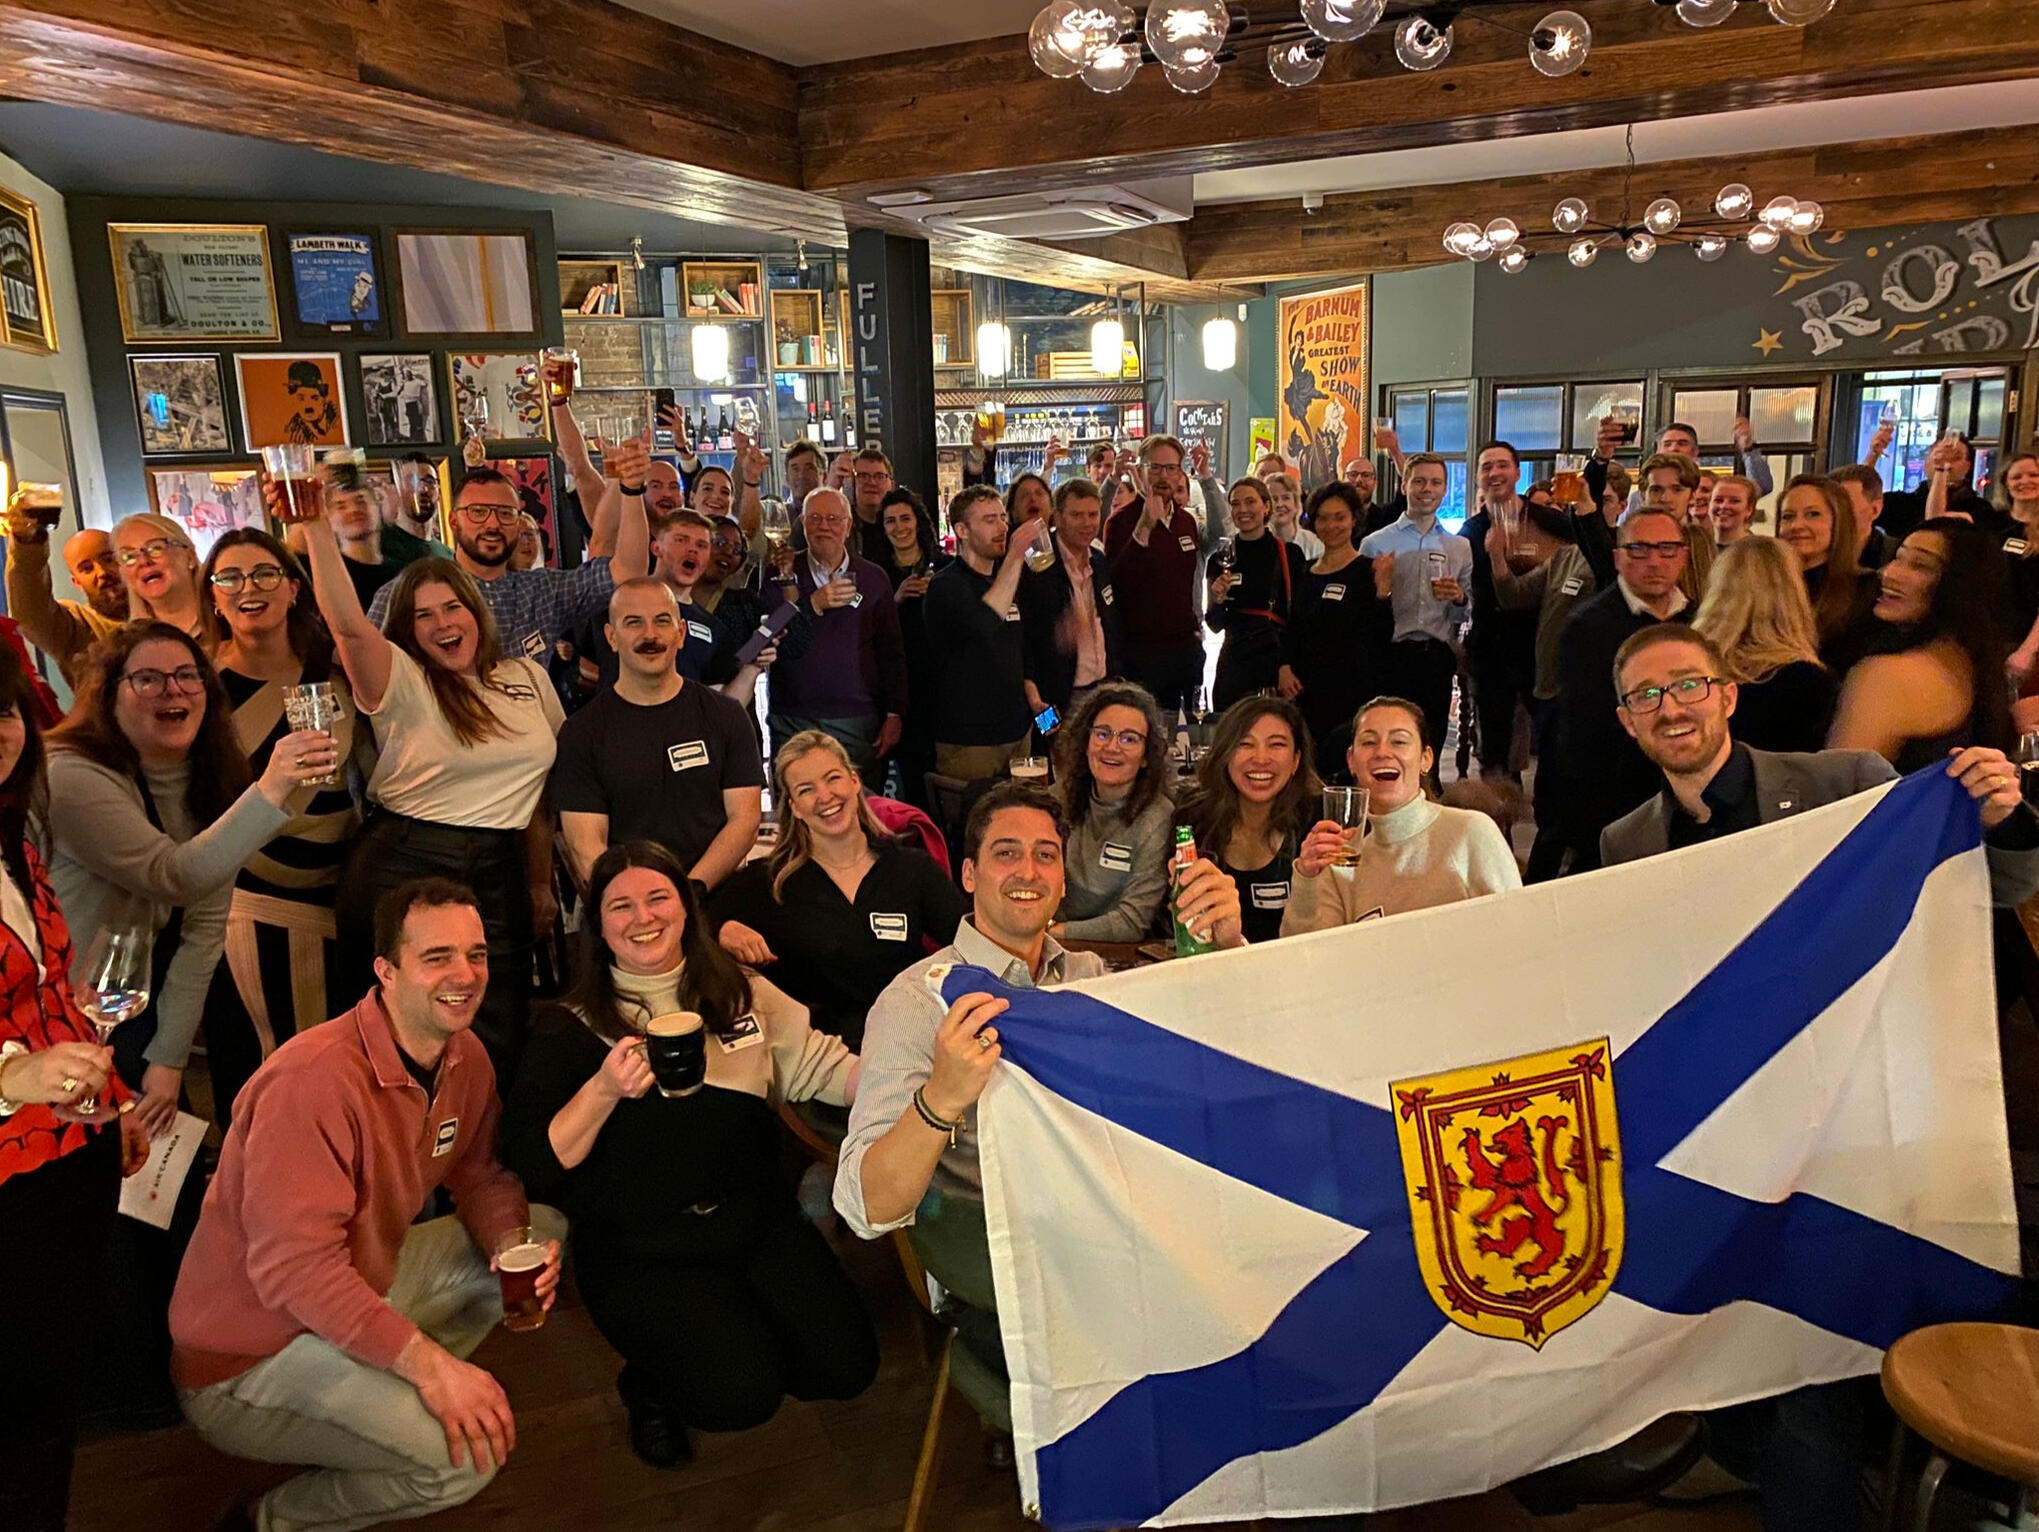 A large group of people in a pub, looking at the camera smiling while raising their glasses. In the foreground, a large Nova Scotia flag is being held up.